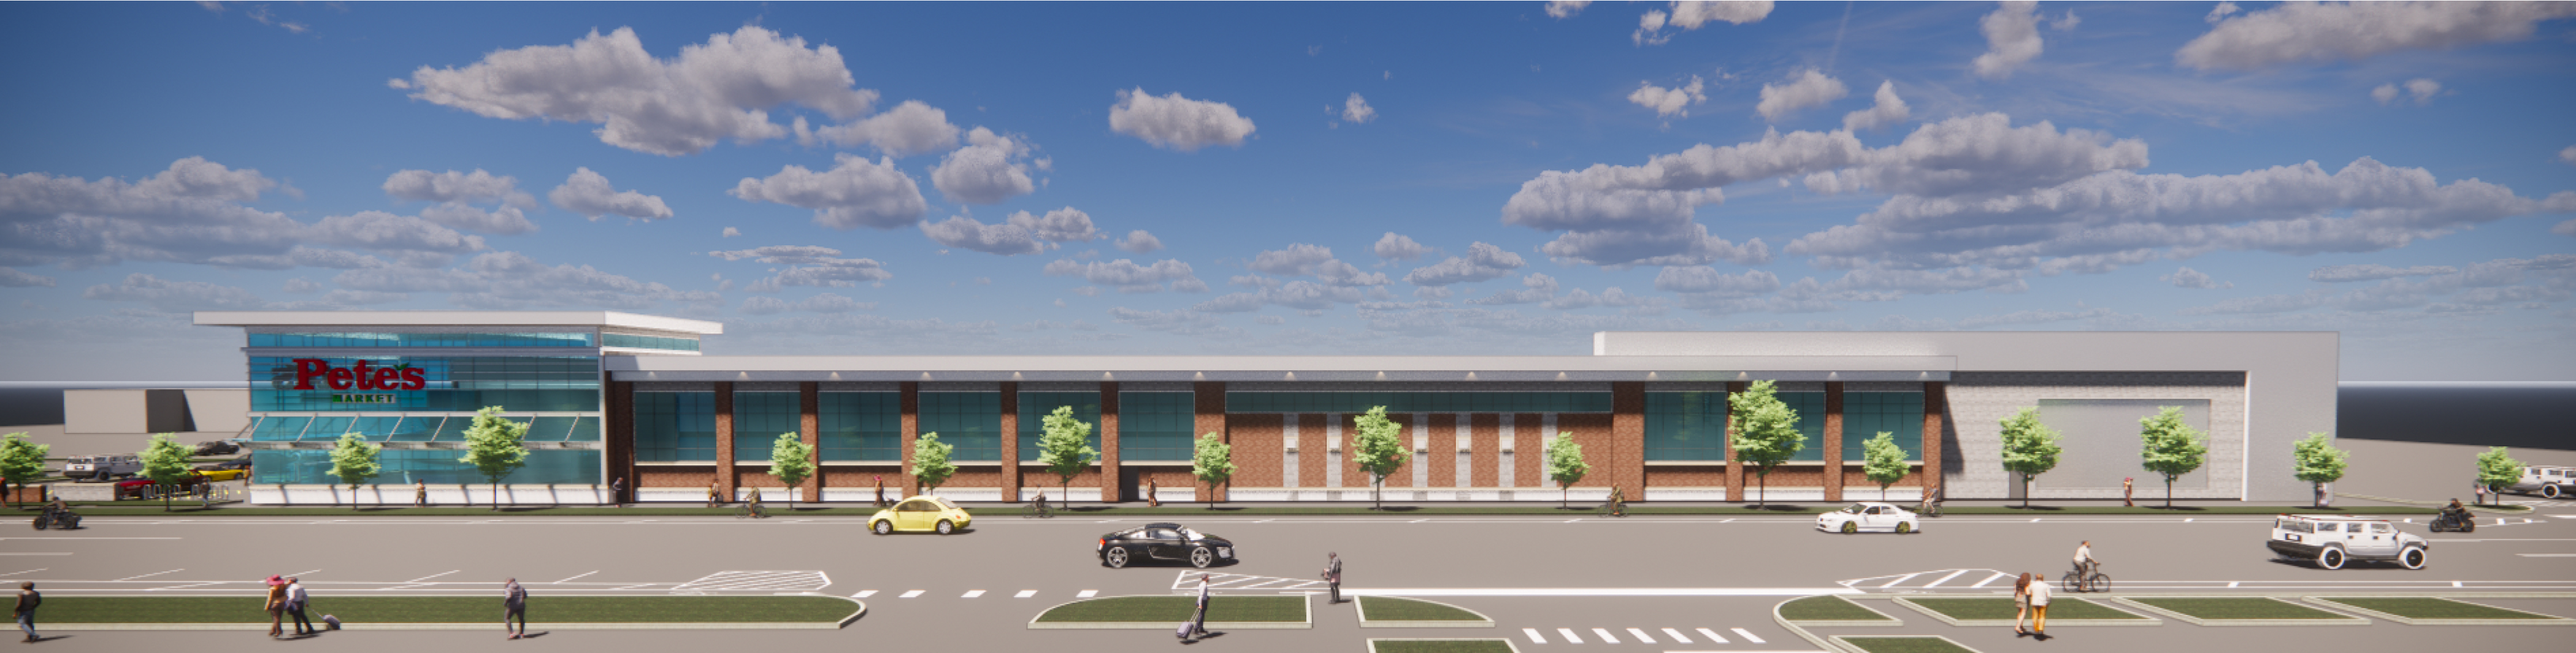 Artist's rendering of the new Pete's Fresh Market being built on Madison Street